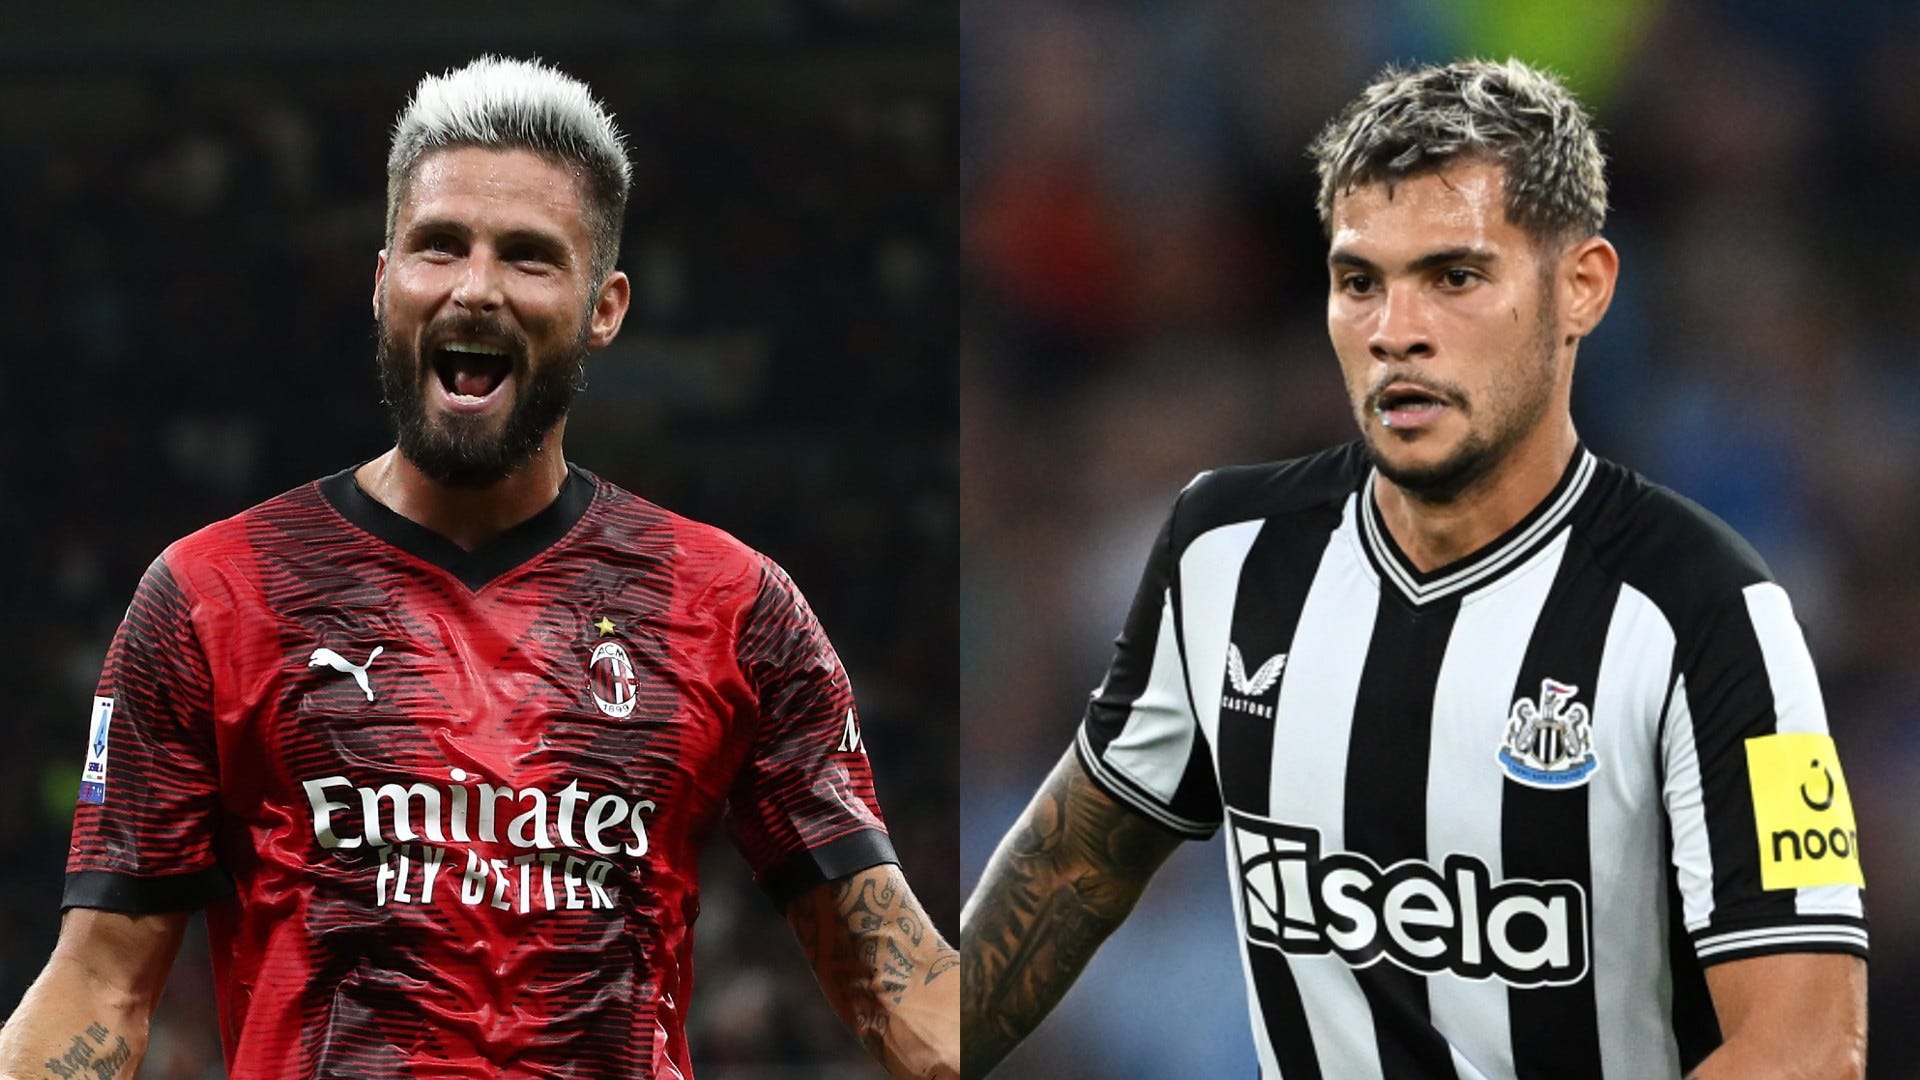 AC Milan vs Newcastle United Live stream, TV channel, kick-off time and where to watch Goal US